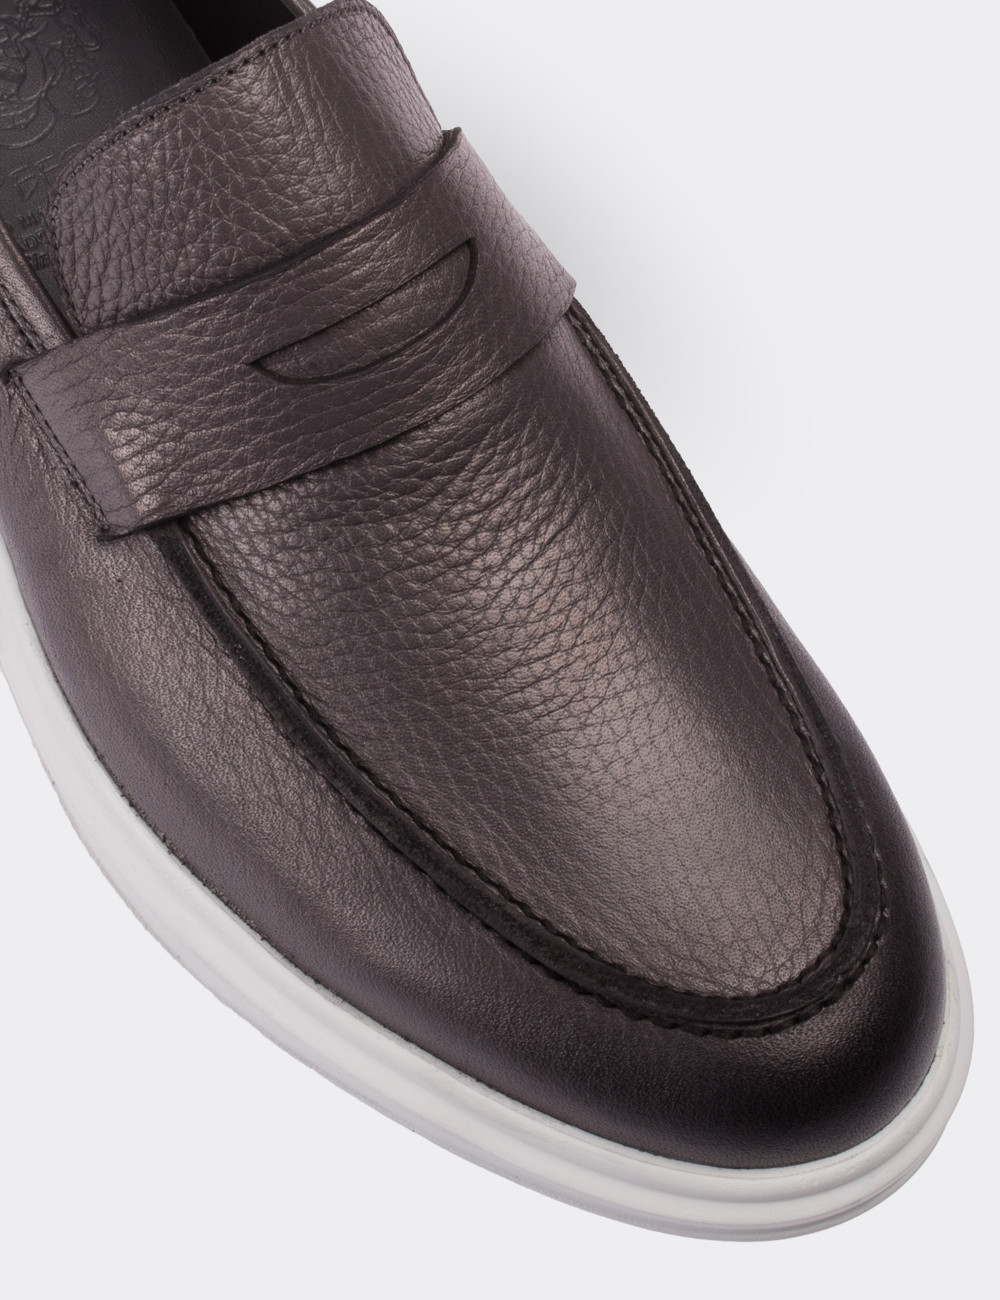 Gray  Leather Loafers - 01670MGRIP01